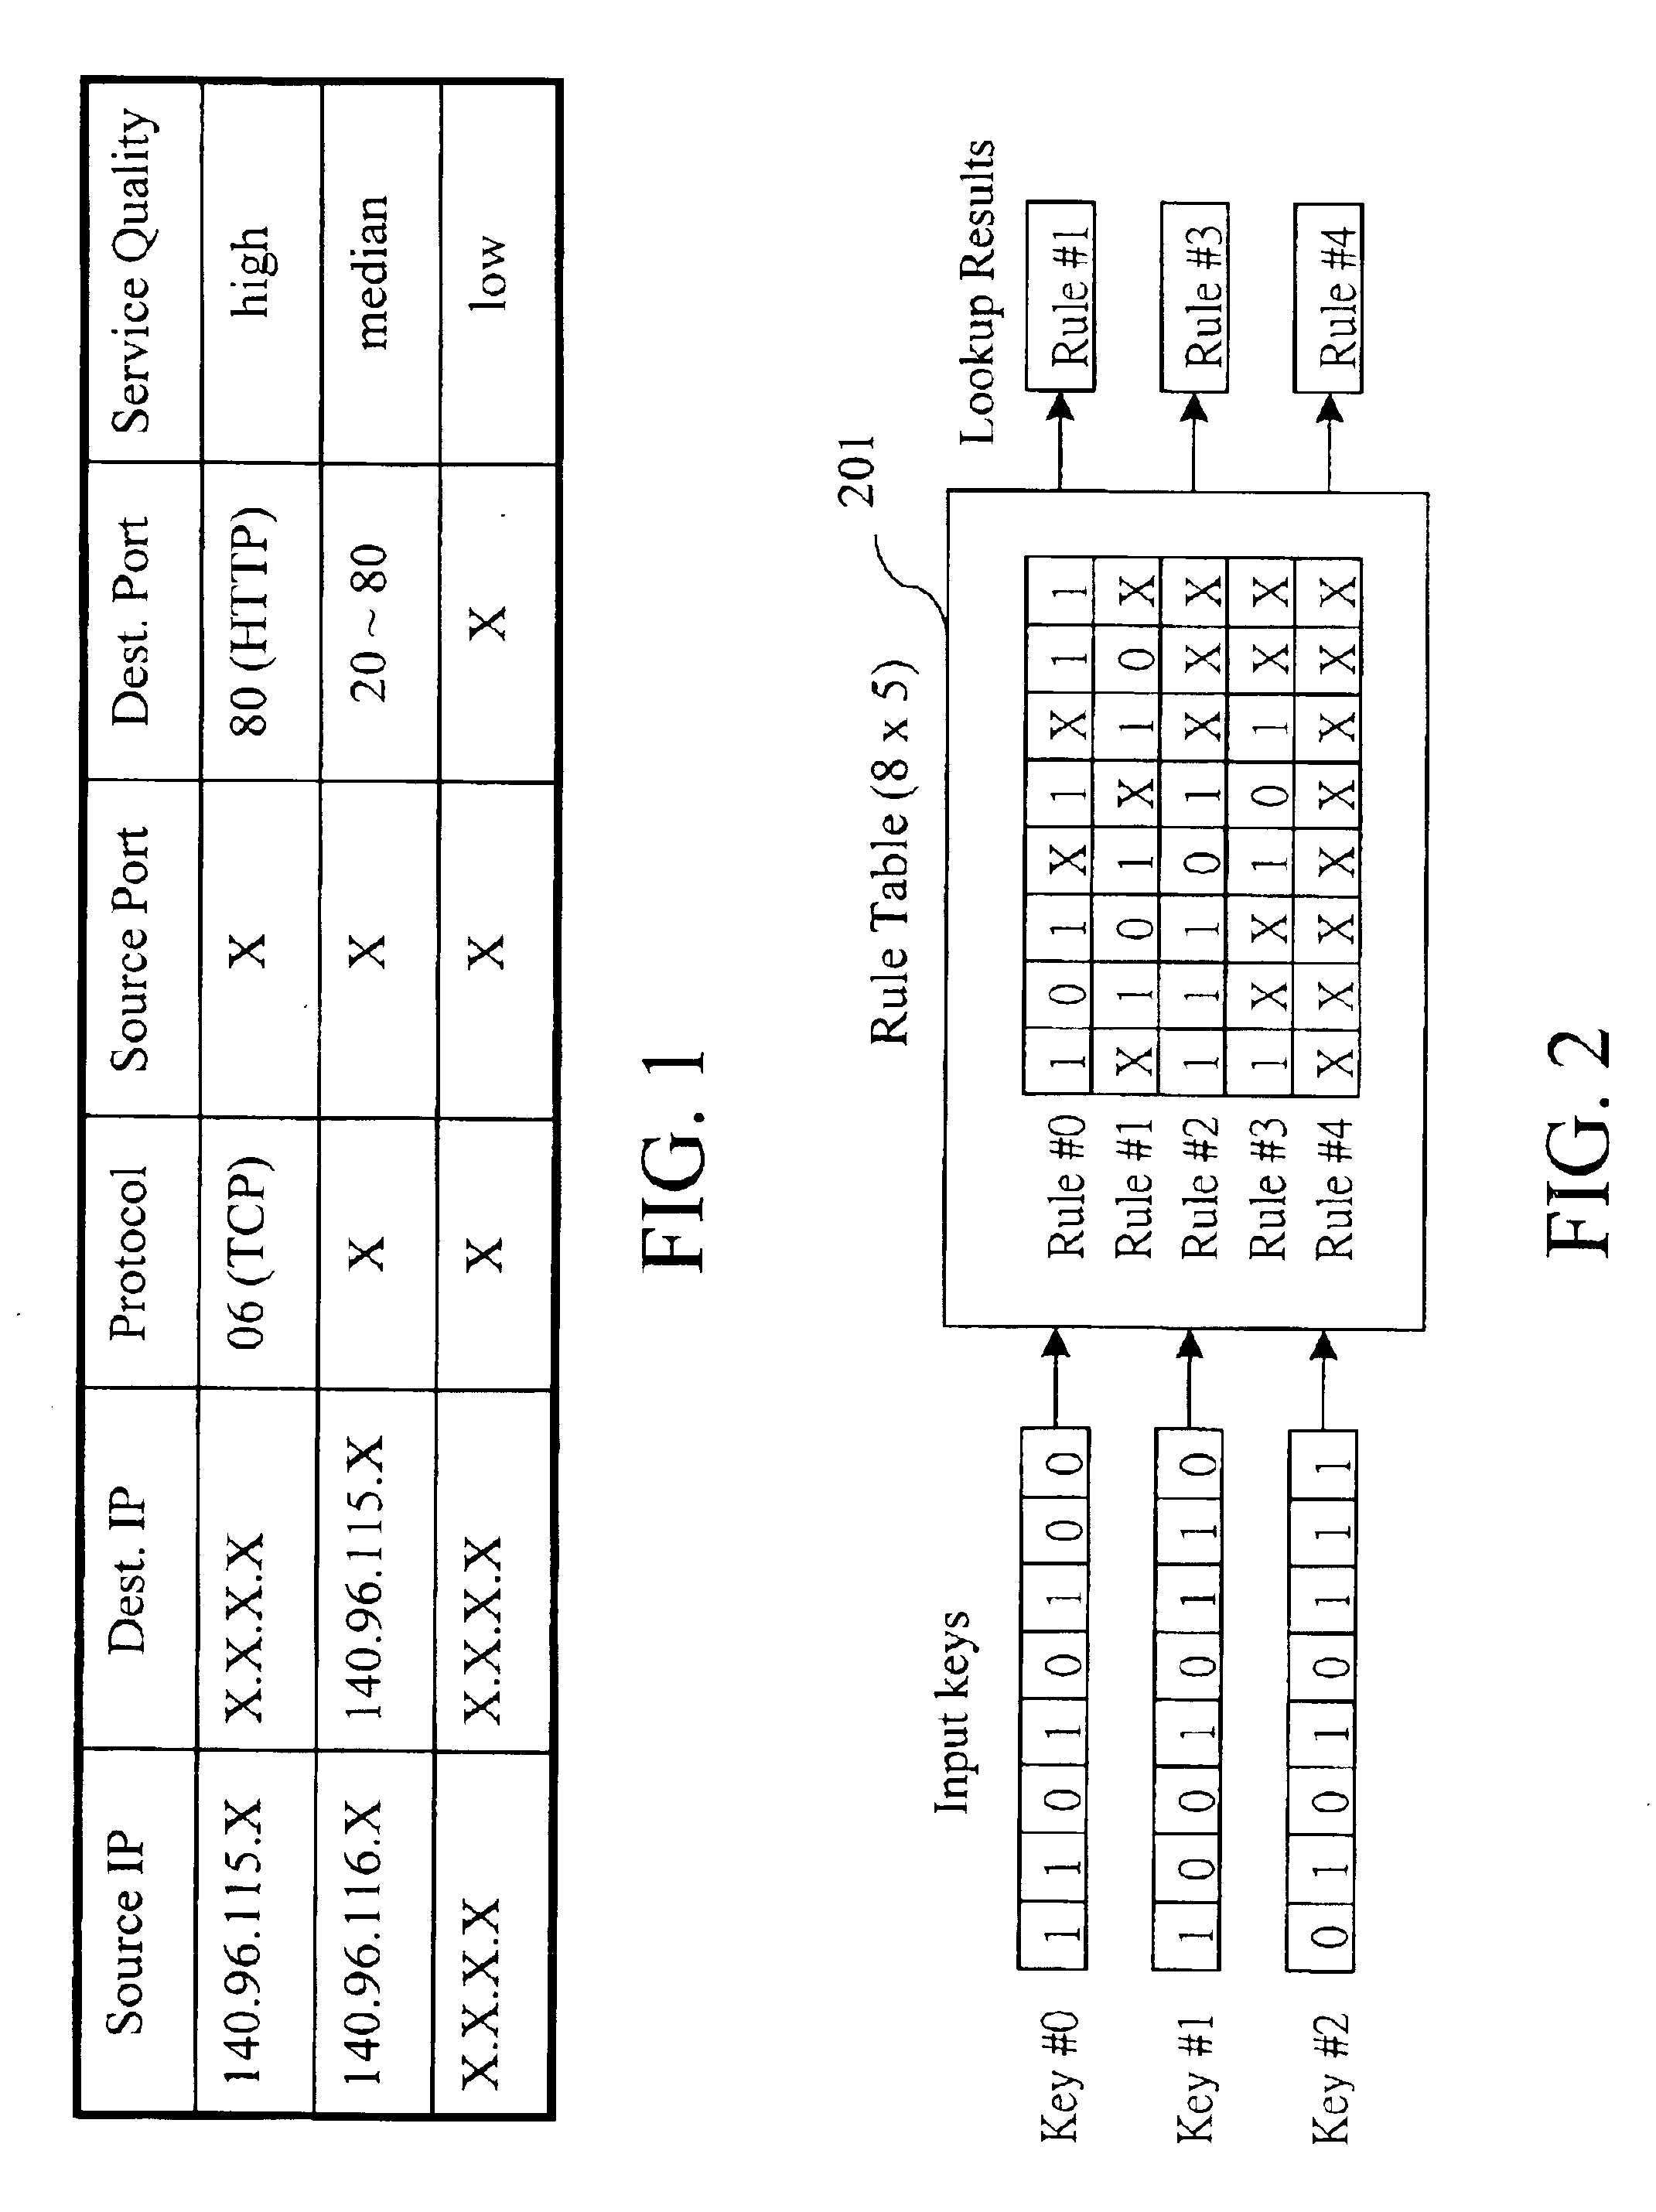 Method of a data range search with plural pre-set rules